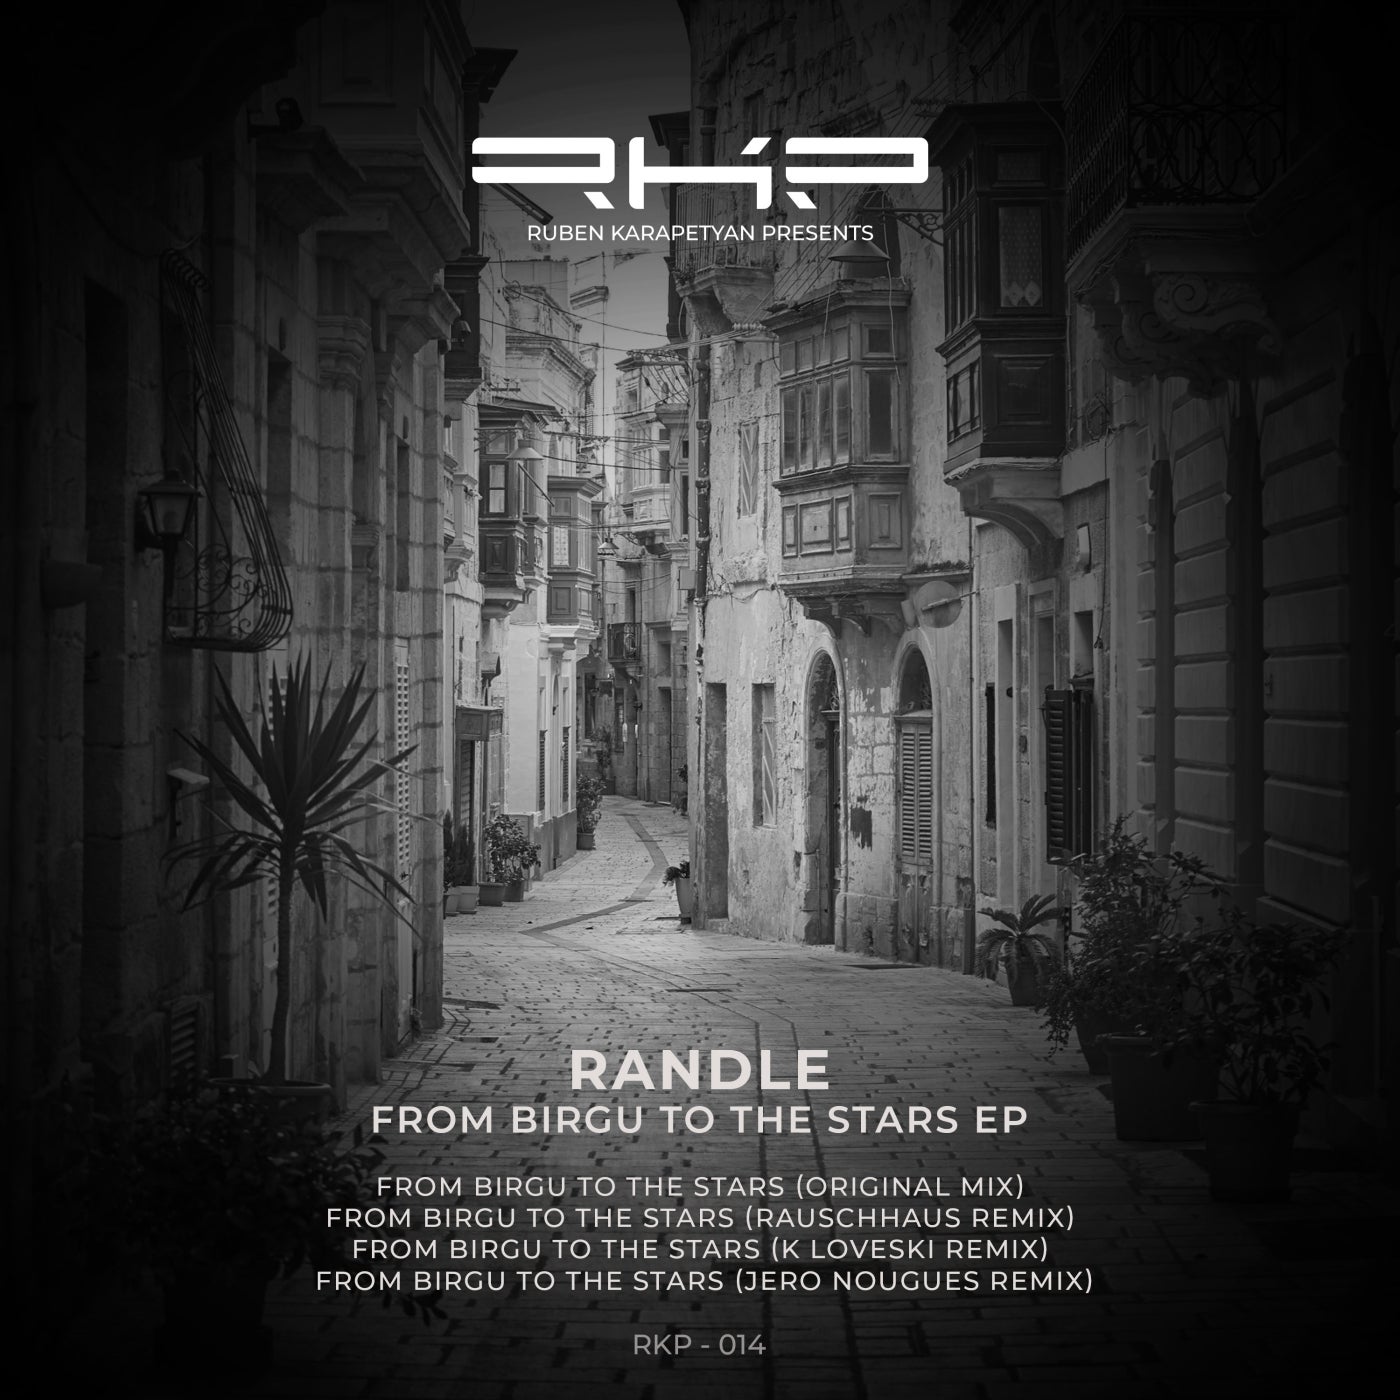 Cover - Randle - From Birgu to the Stars (Rauschhaus Remix)